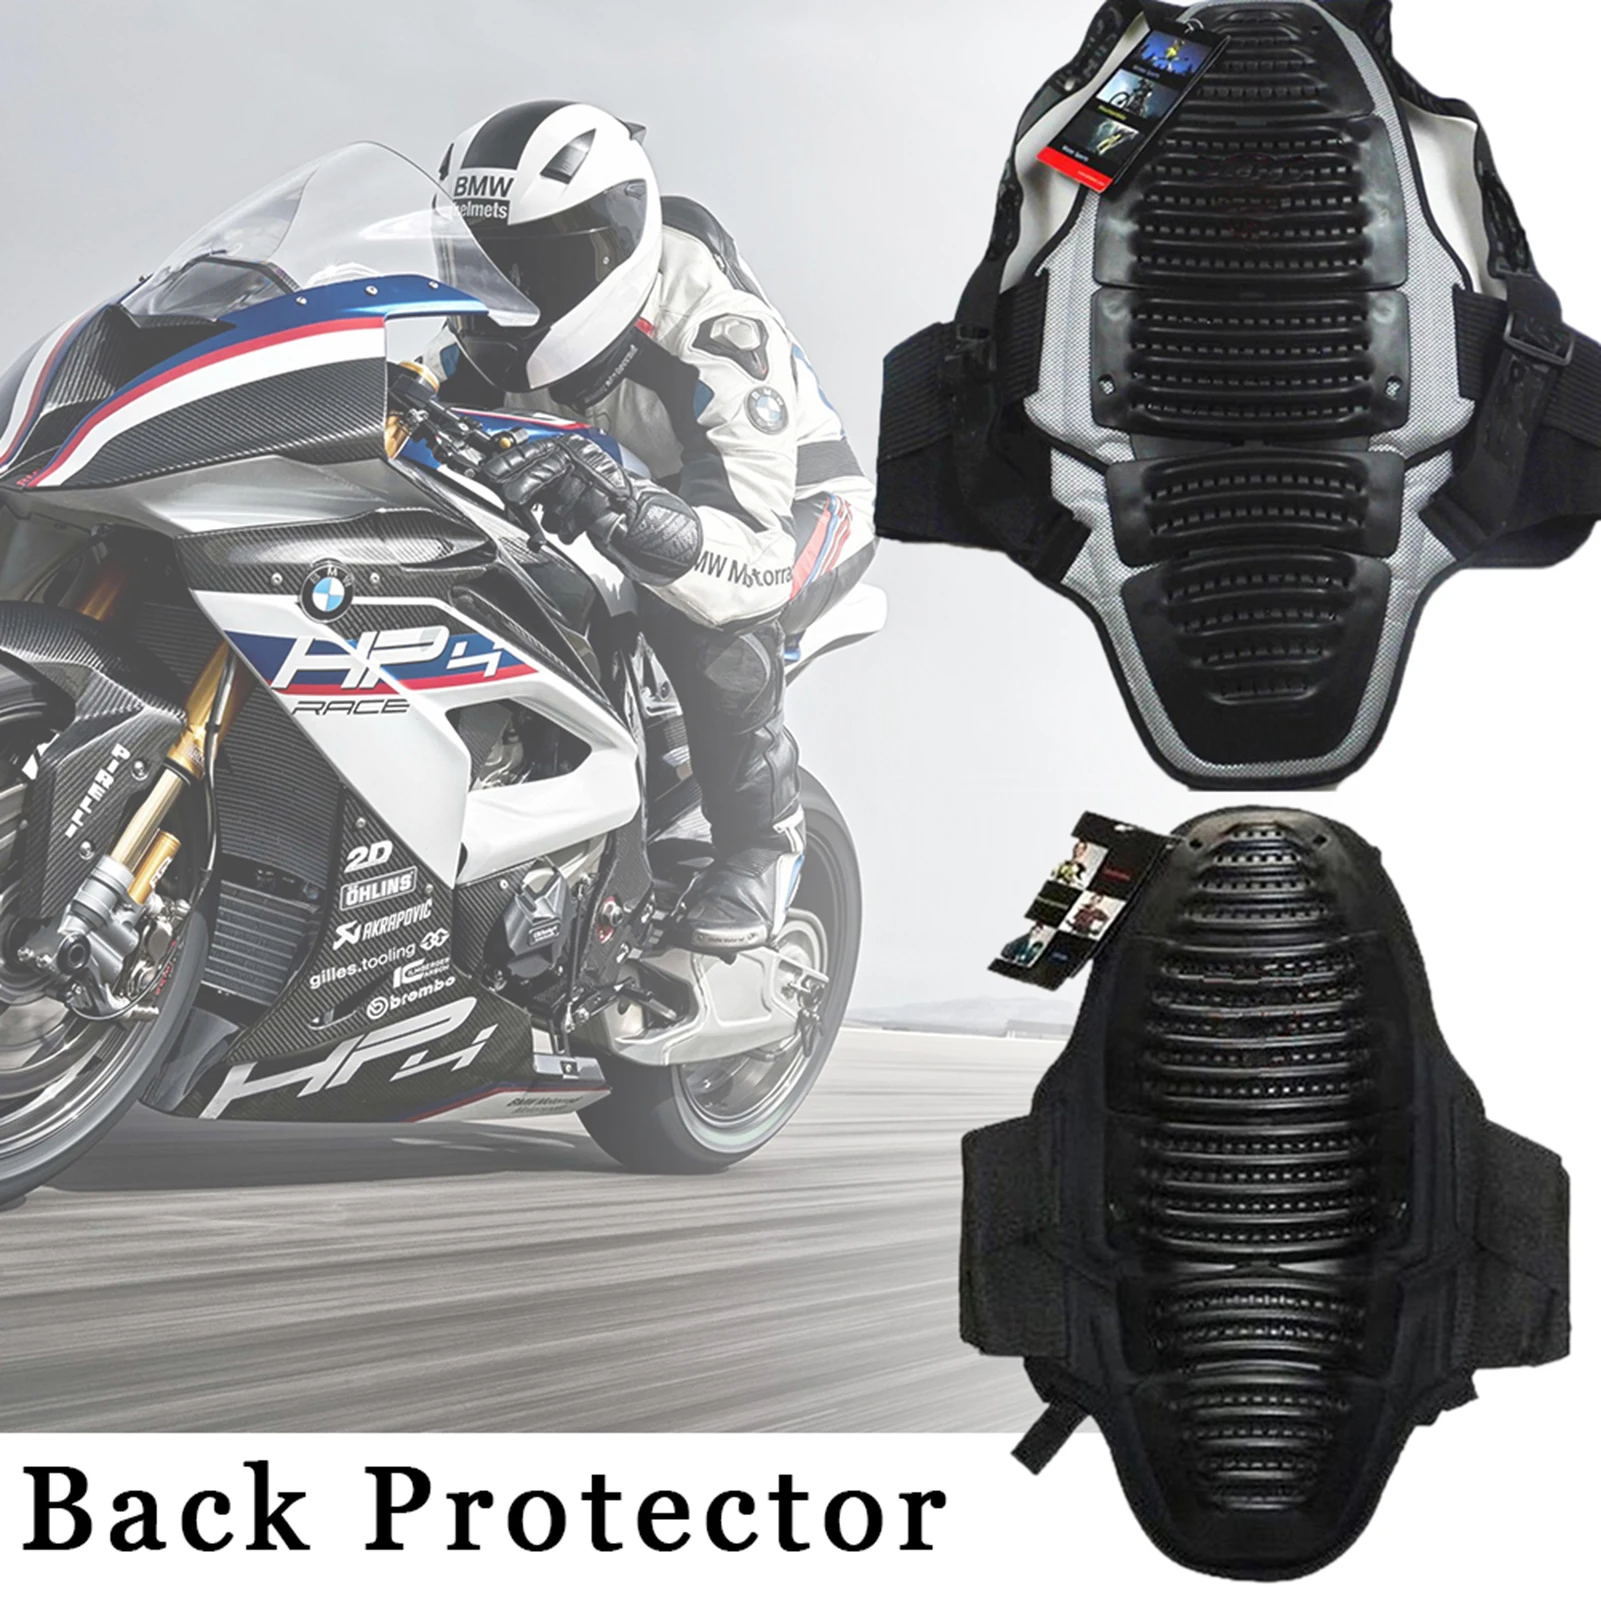 

Motorcycle Knight Back Protector Professional EVA Armor Riding Equipment Extreme Sports Protection Safe Breathable Detachable